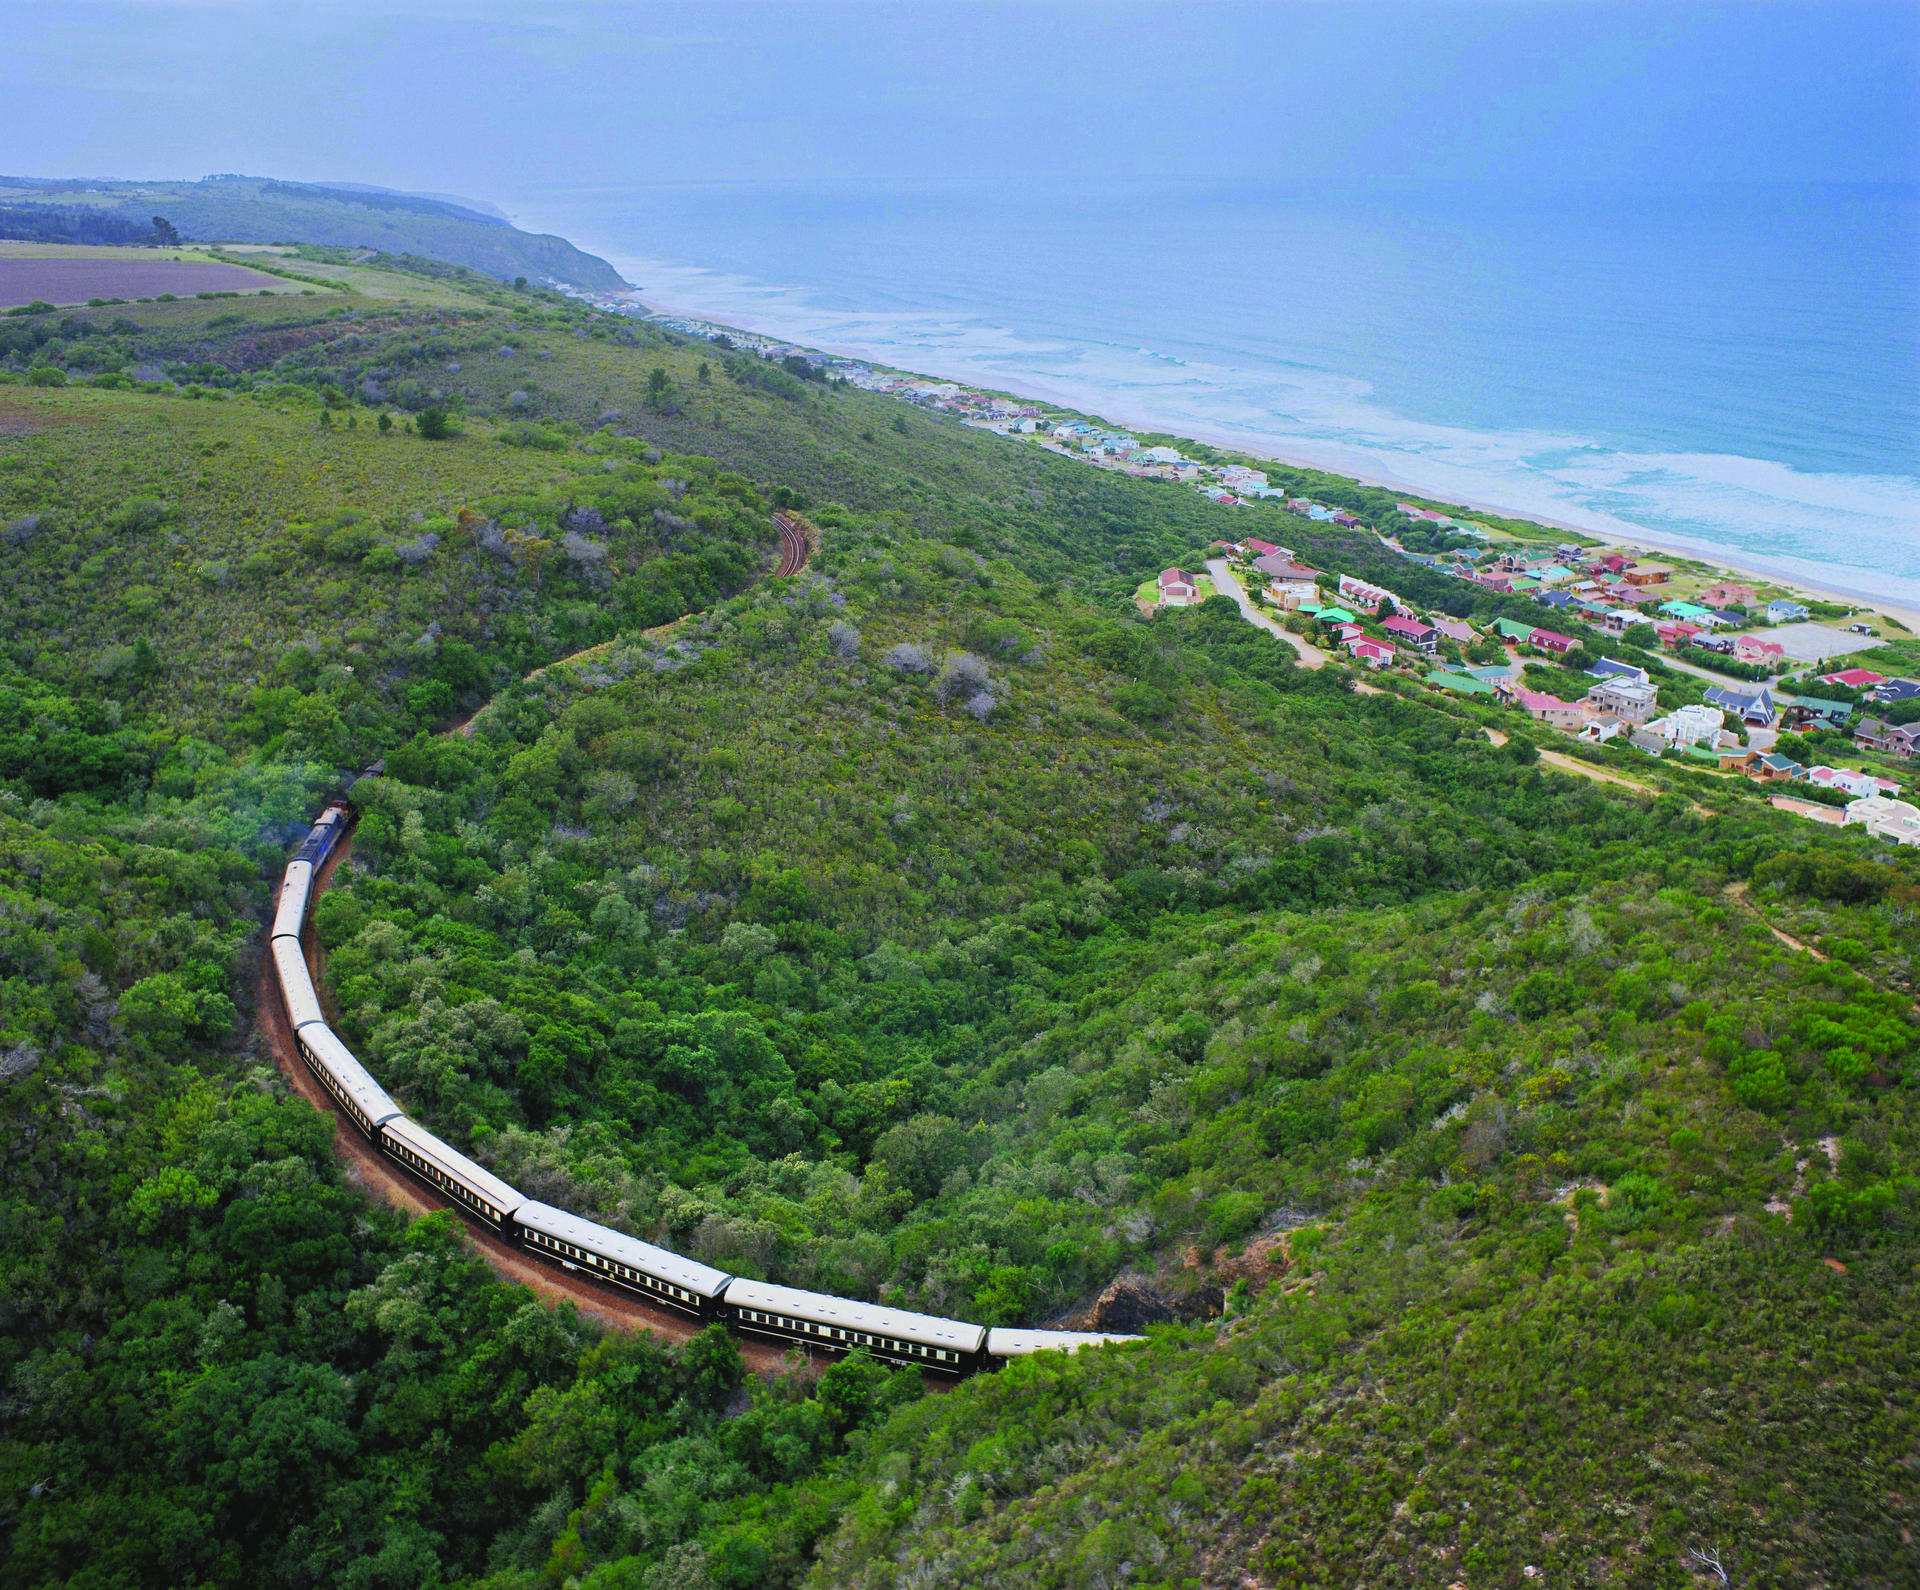 A Rovos Rail train passes Great Brak River, a seaside town in the Western Cape province of South Africa. Photos: Anna Healy Fenton and handouts